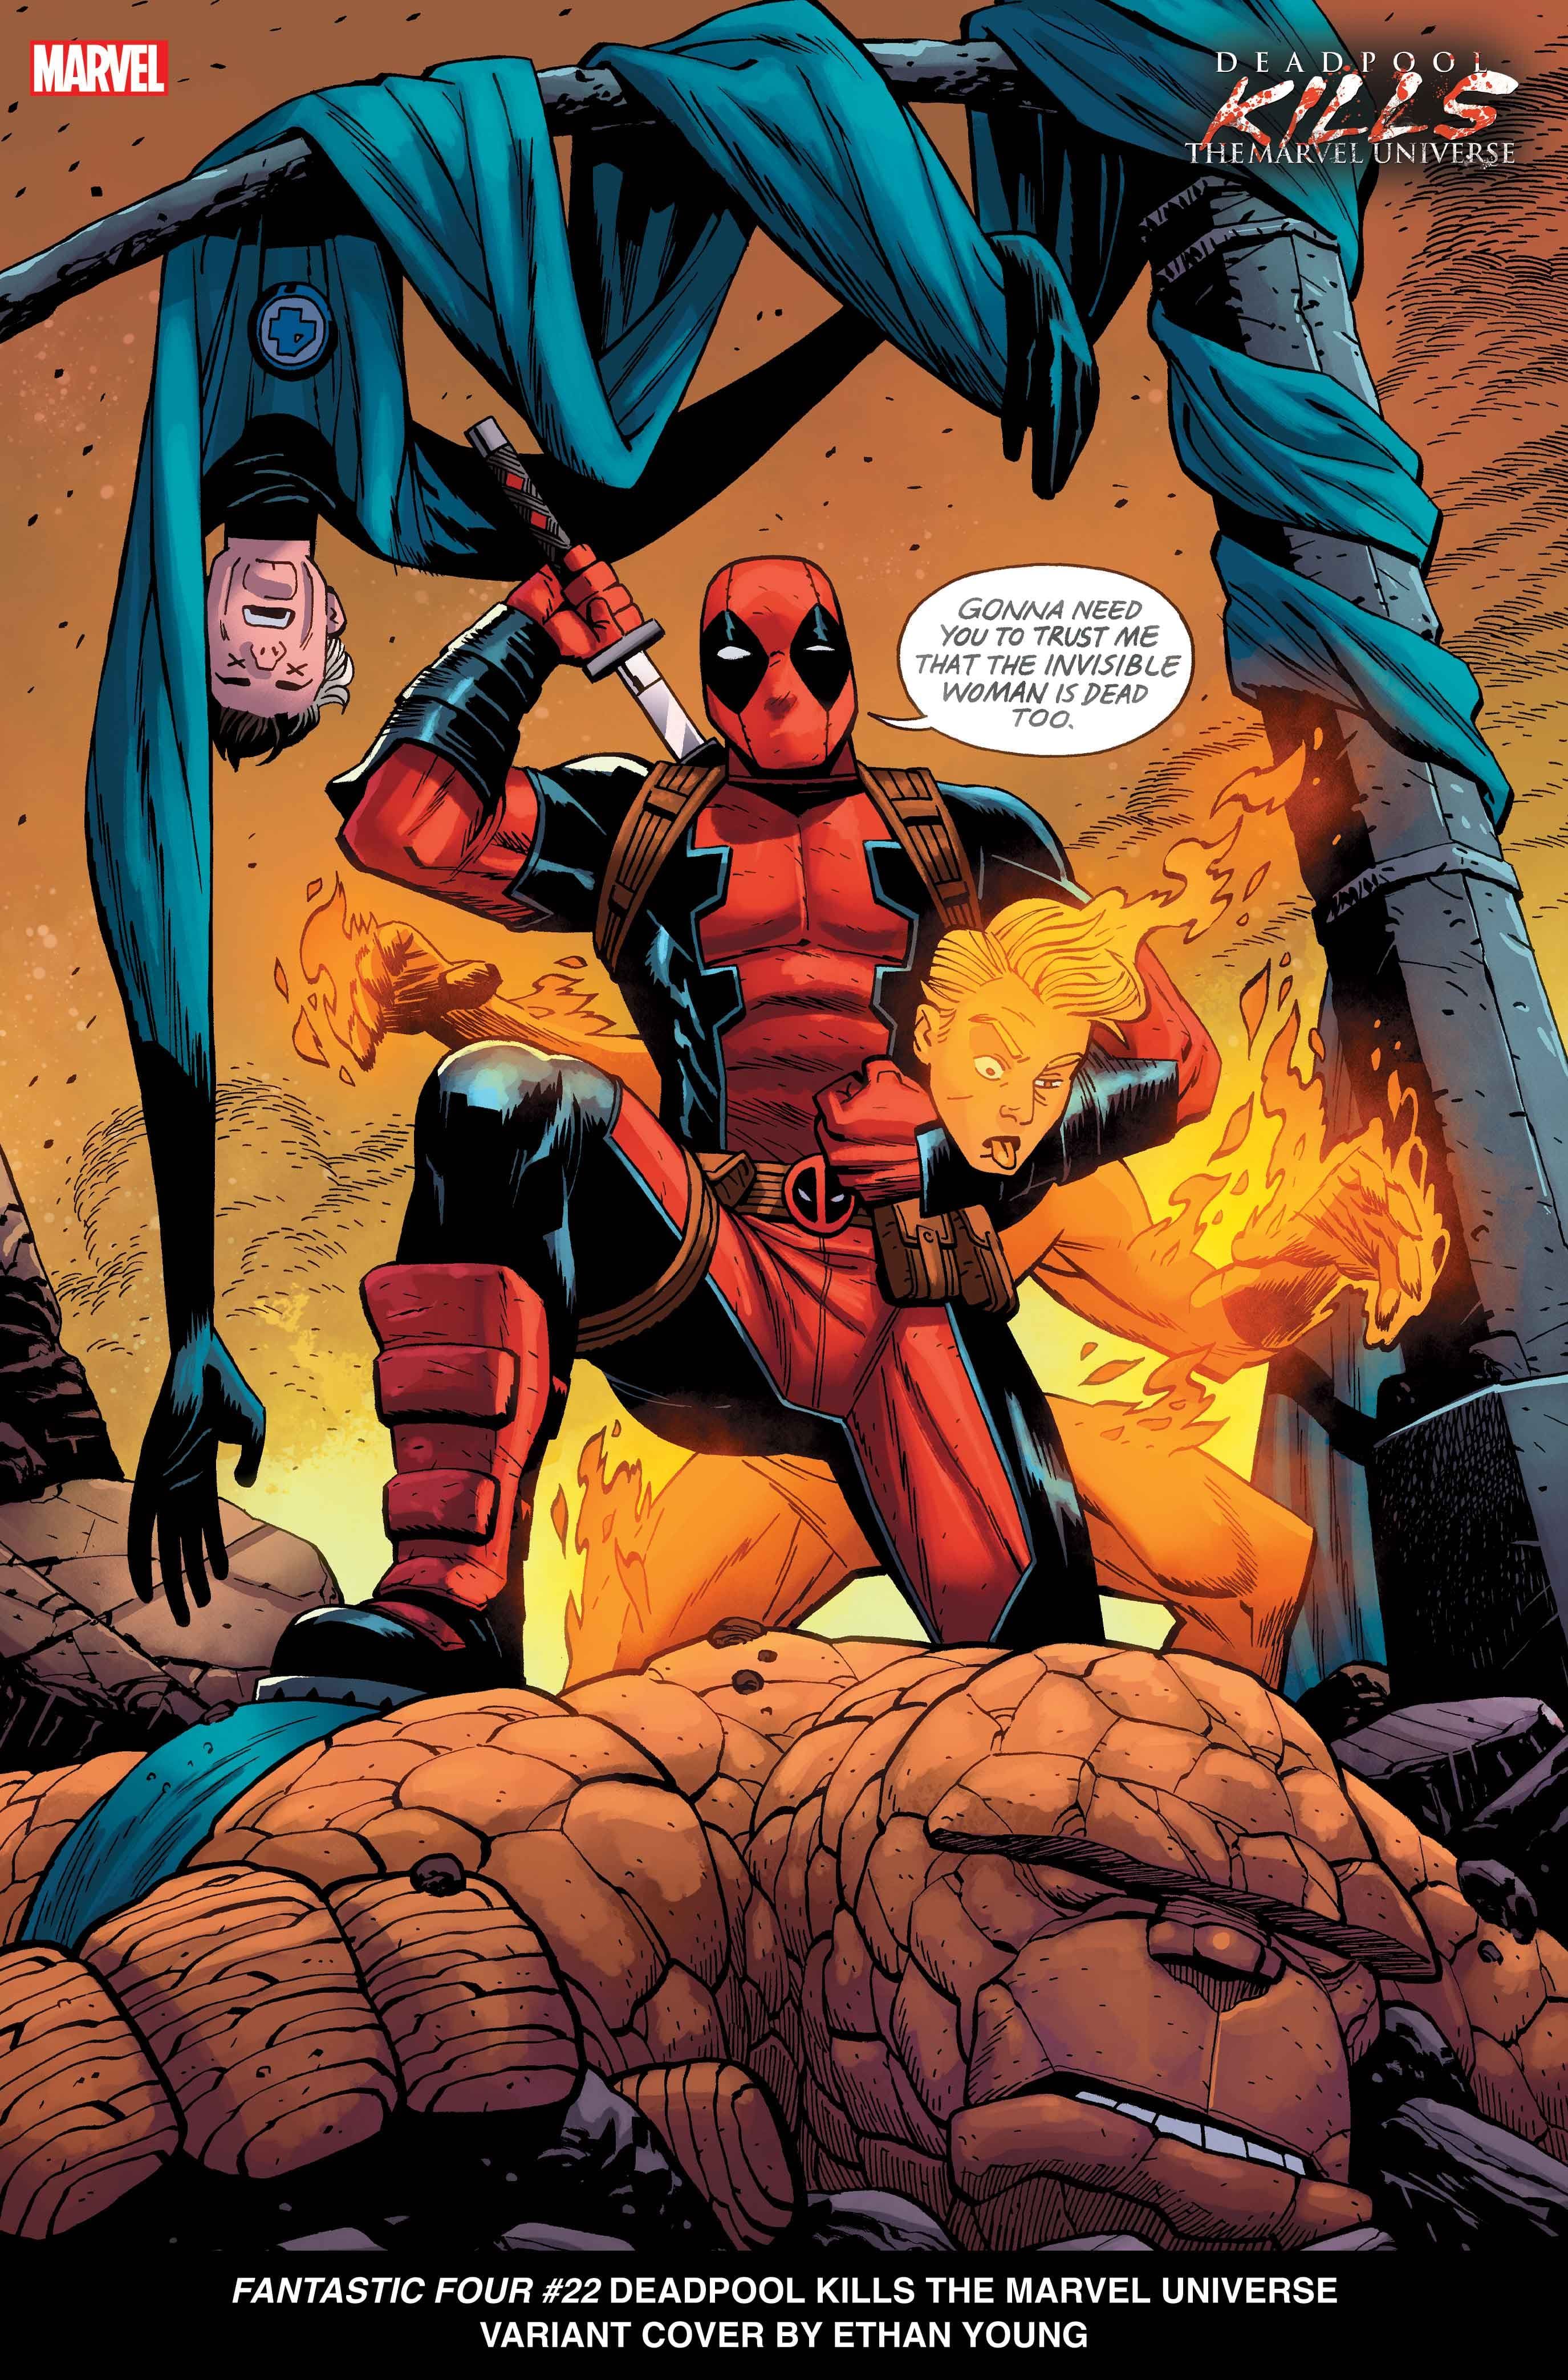 FANTASTIC FOUR #22 Deadpool Kills the Marvel Universe Variant Cover by Ethan Young